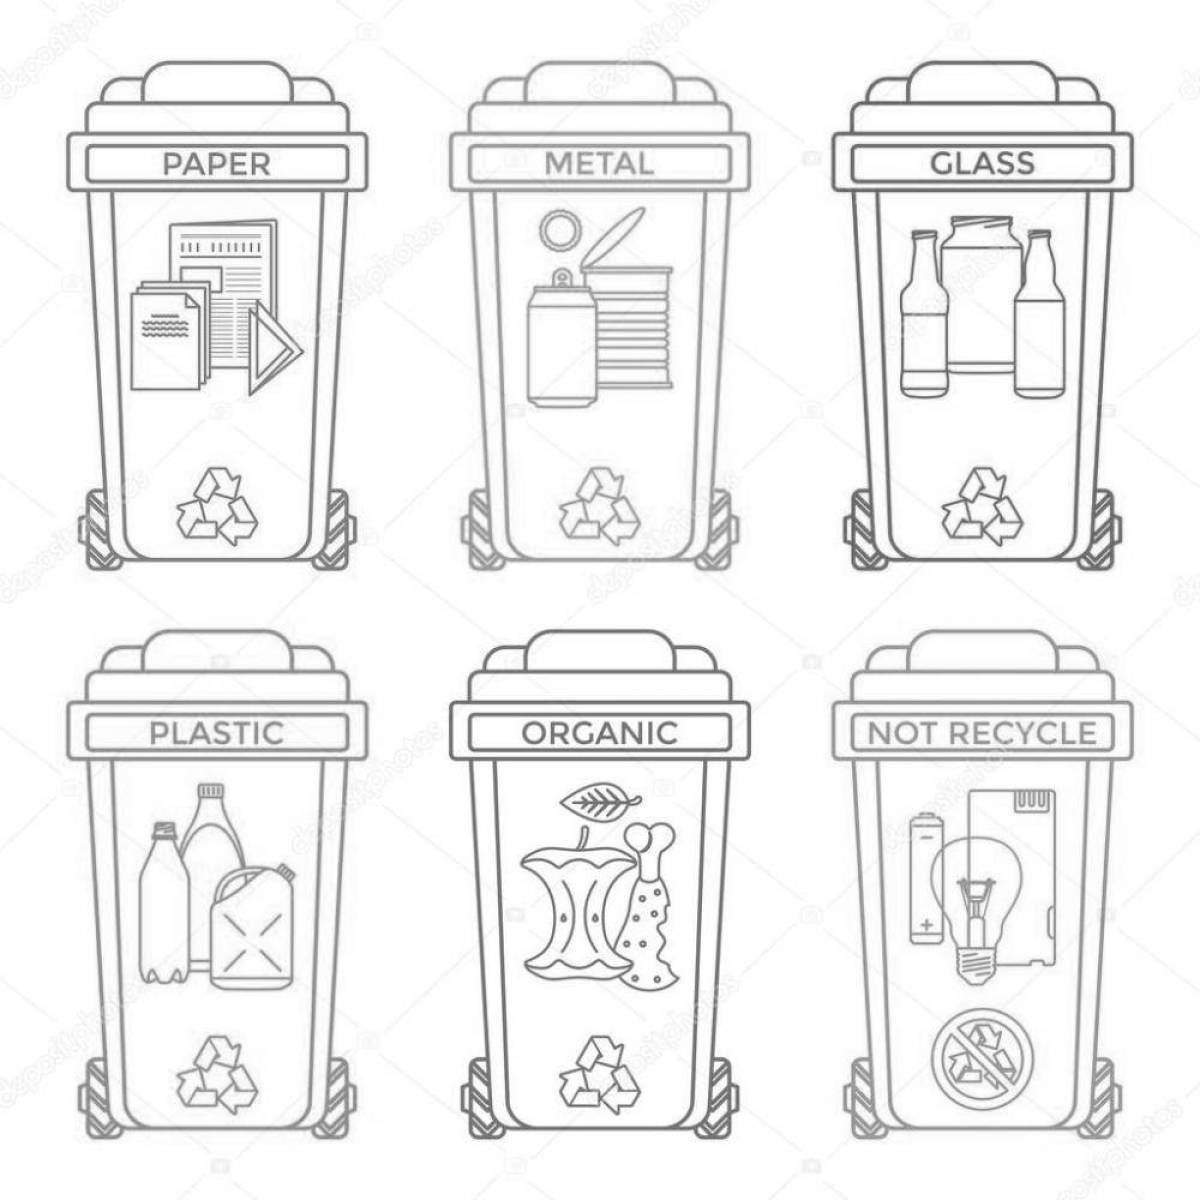 Creative garbage sorting coloring book for children